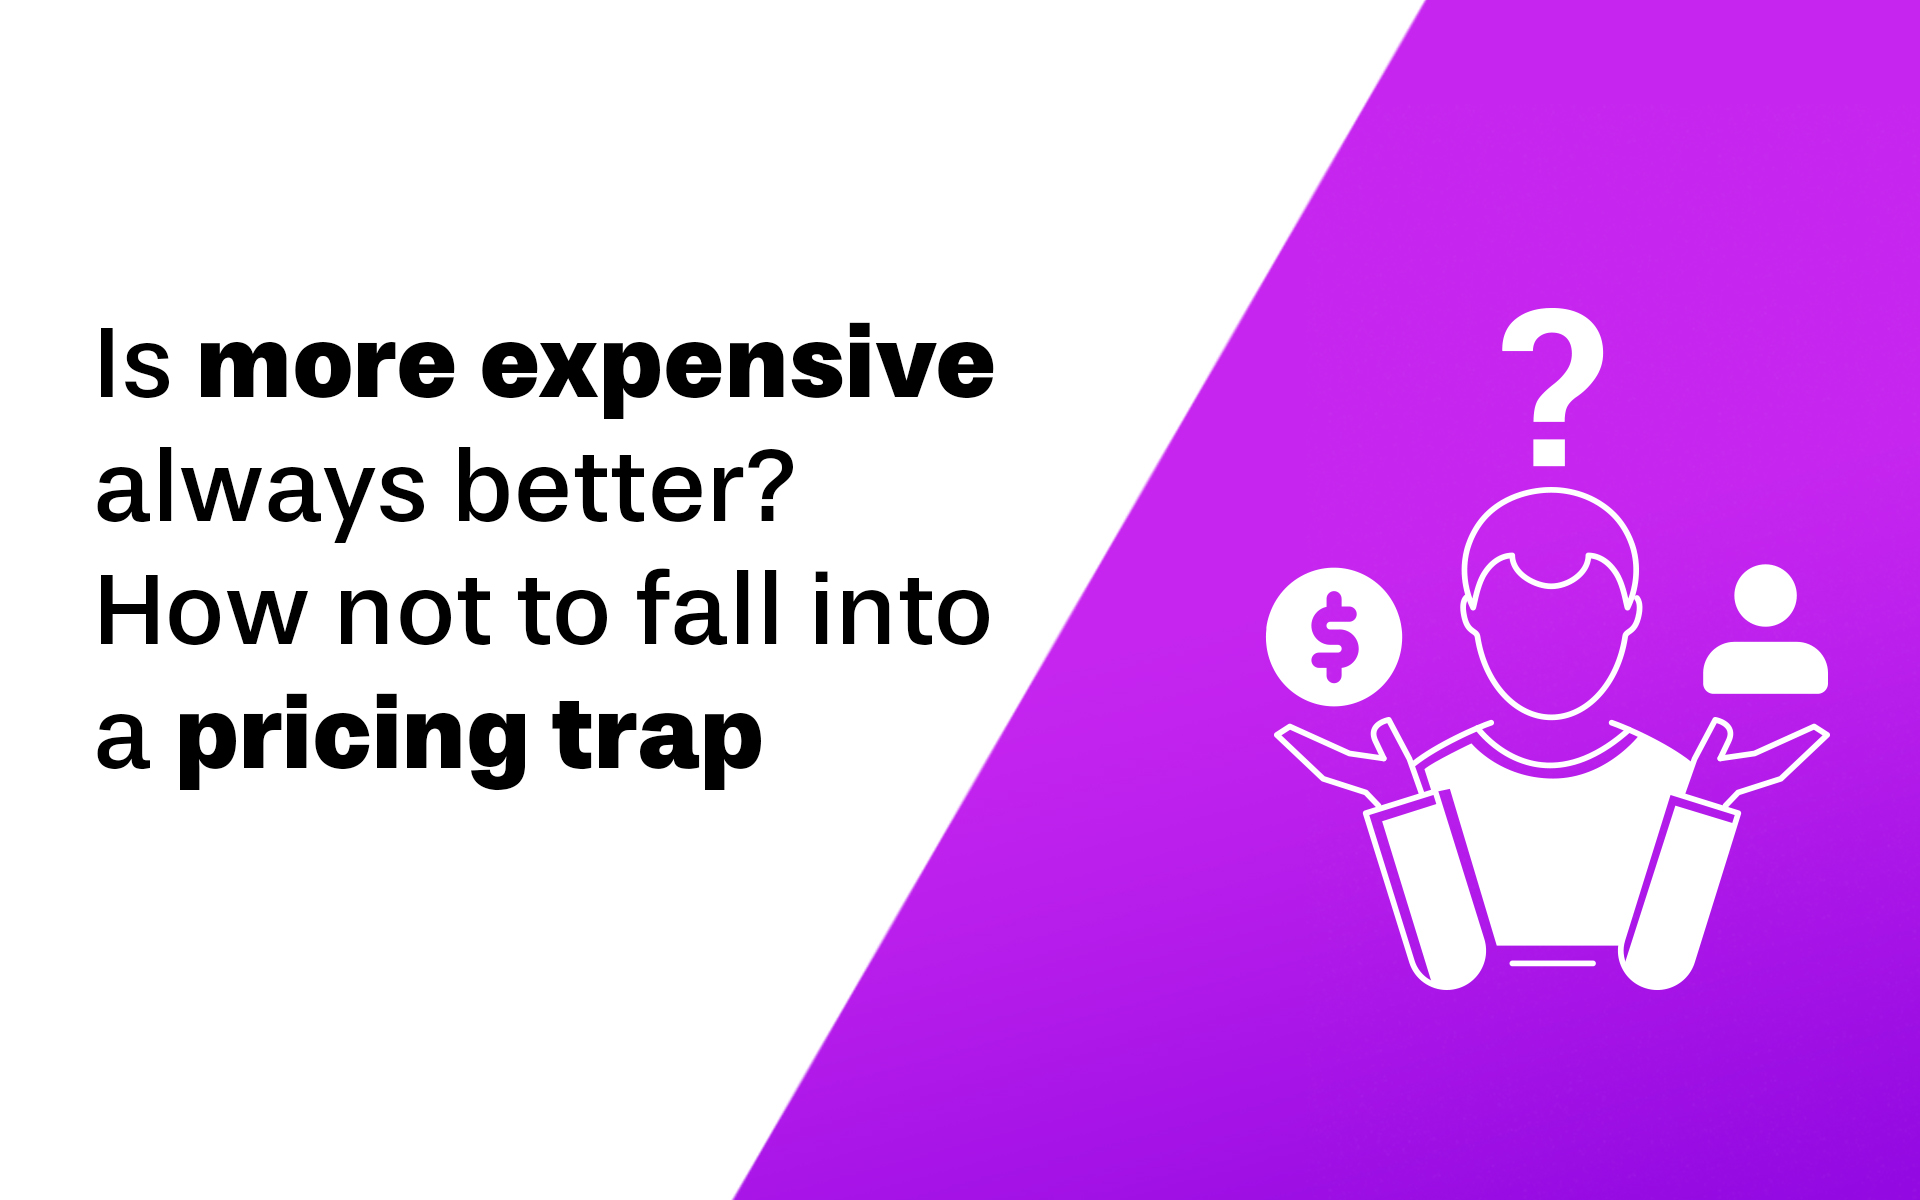 Pricing trap